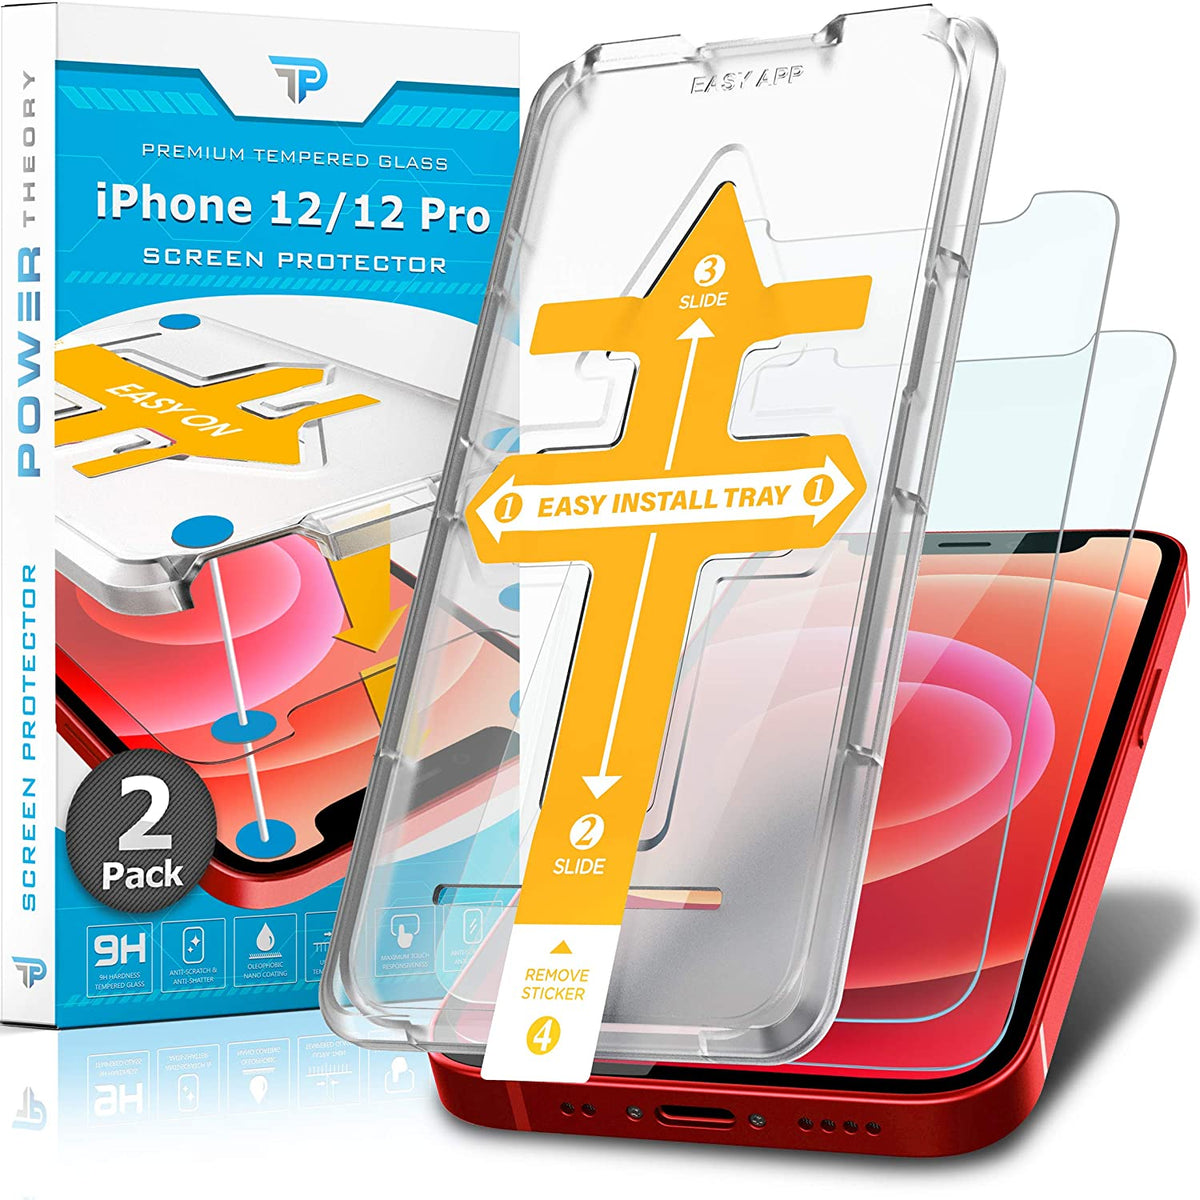 iPhone 12 Pro / iPhone 12 Tempered Glass Screen Protector [2-Pack] Cover